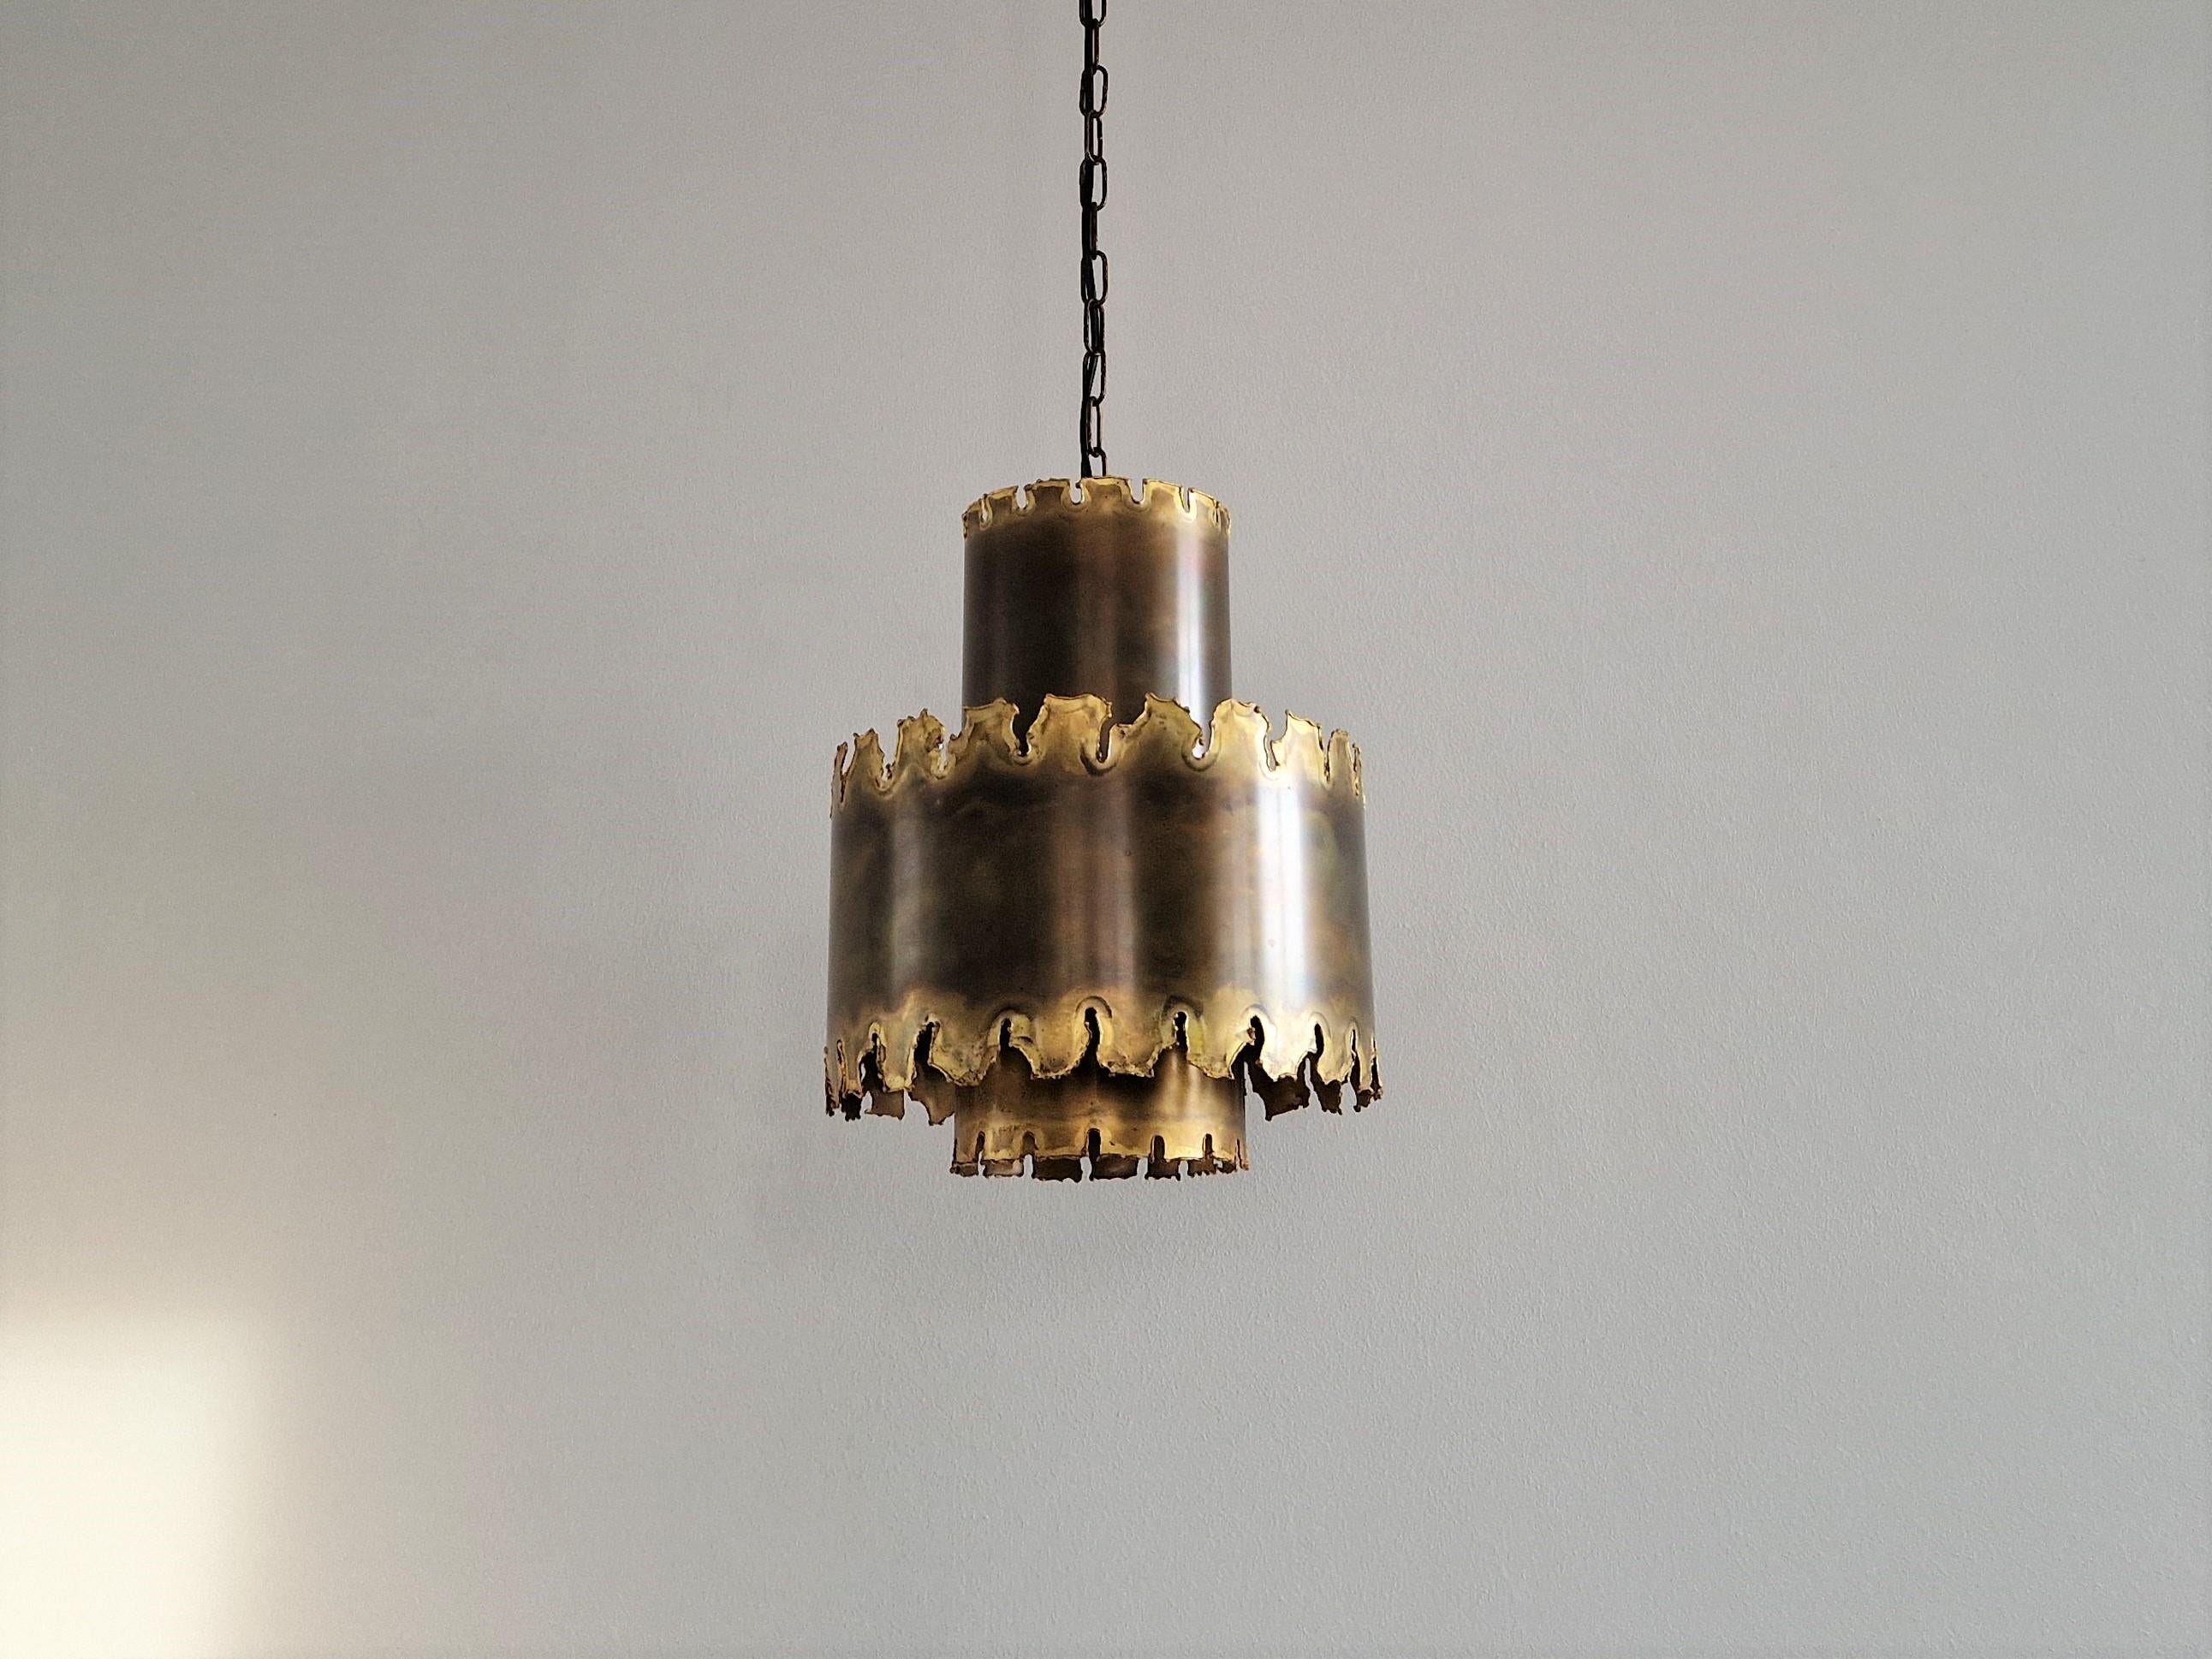 This stunning brutalist pendant lamp, model 6407, was designed by Svend Aage Holm Sørensen for Sørensen & Co in Denmark in the 1960's. The use and work of oxidised brass makes this light an impressive item. The lamp in a very good condition with